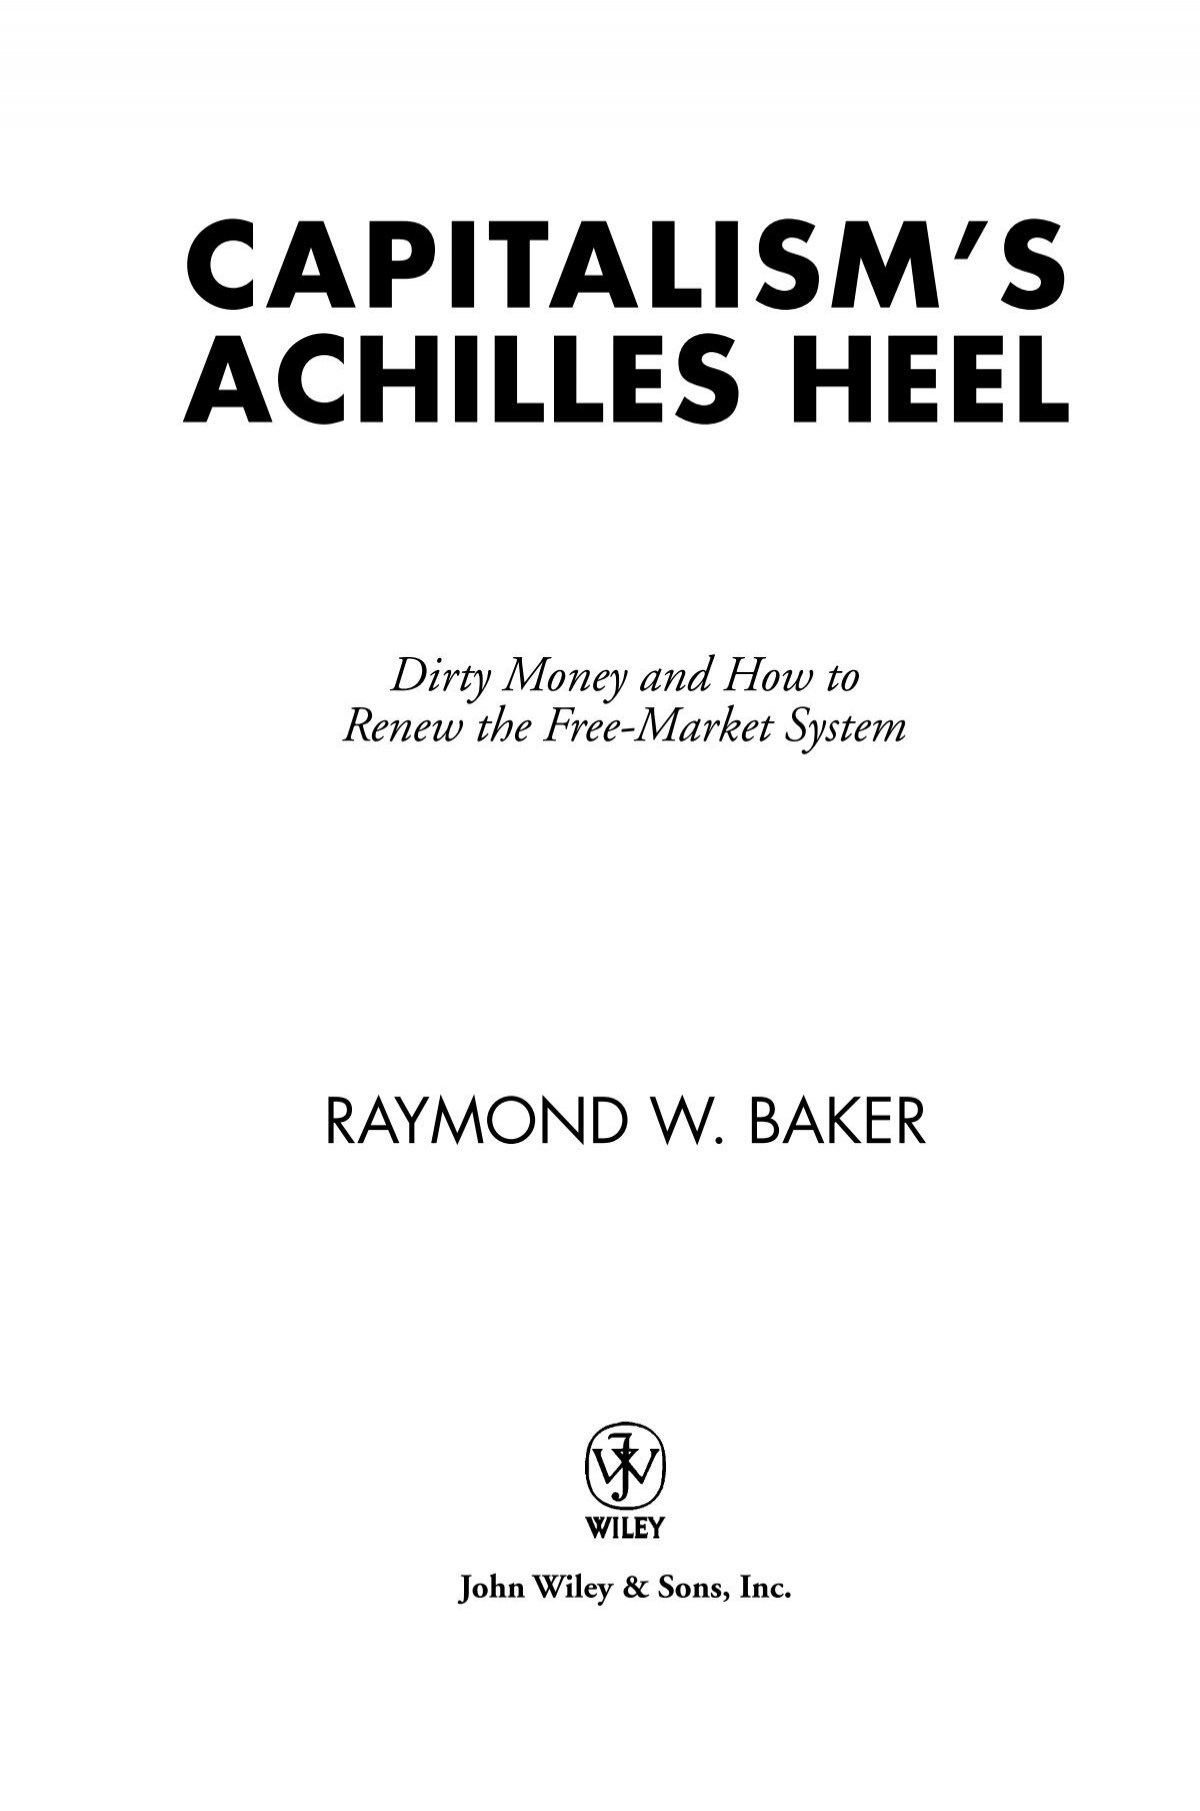 CAPITALISM'S ACHILLES HEEL Dirty Money and How to